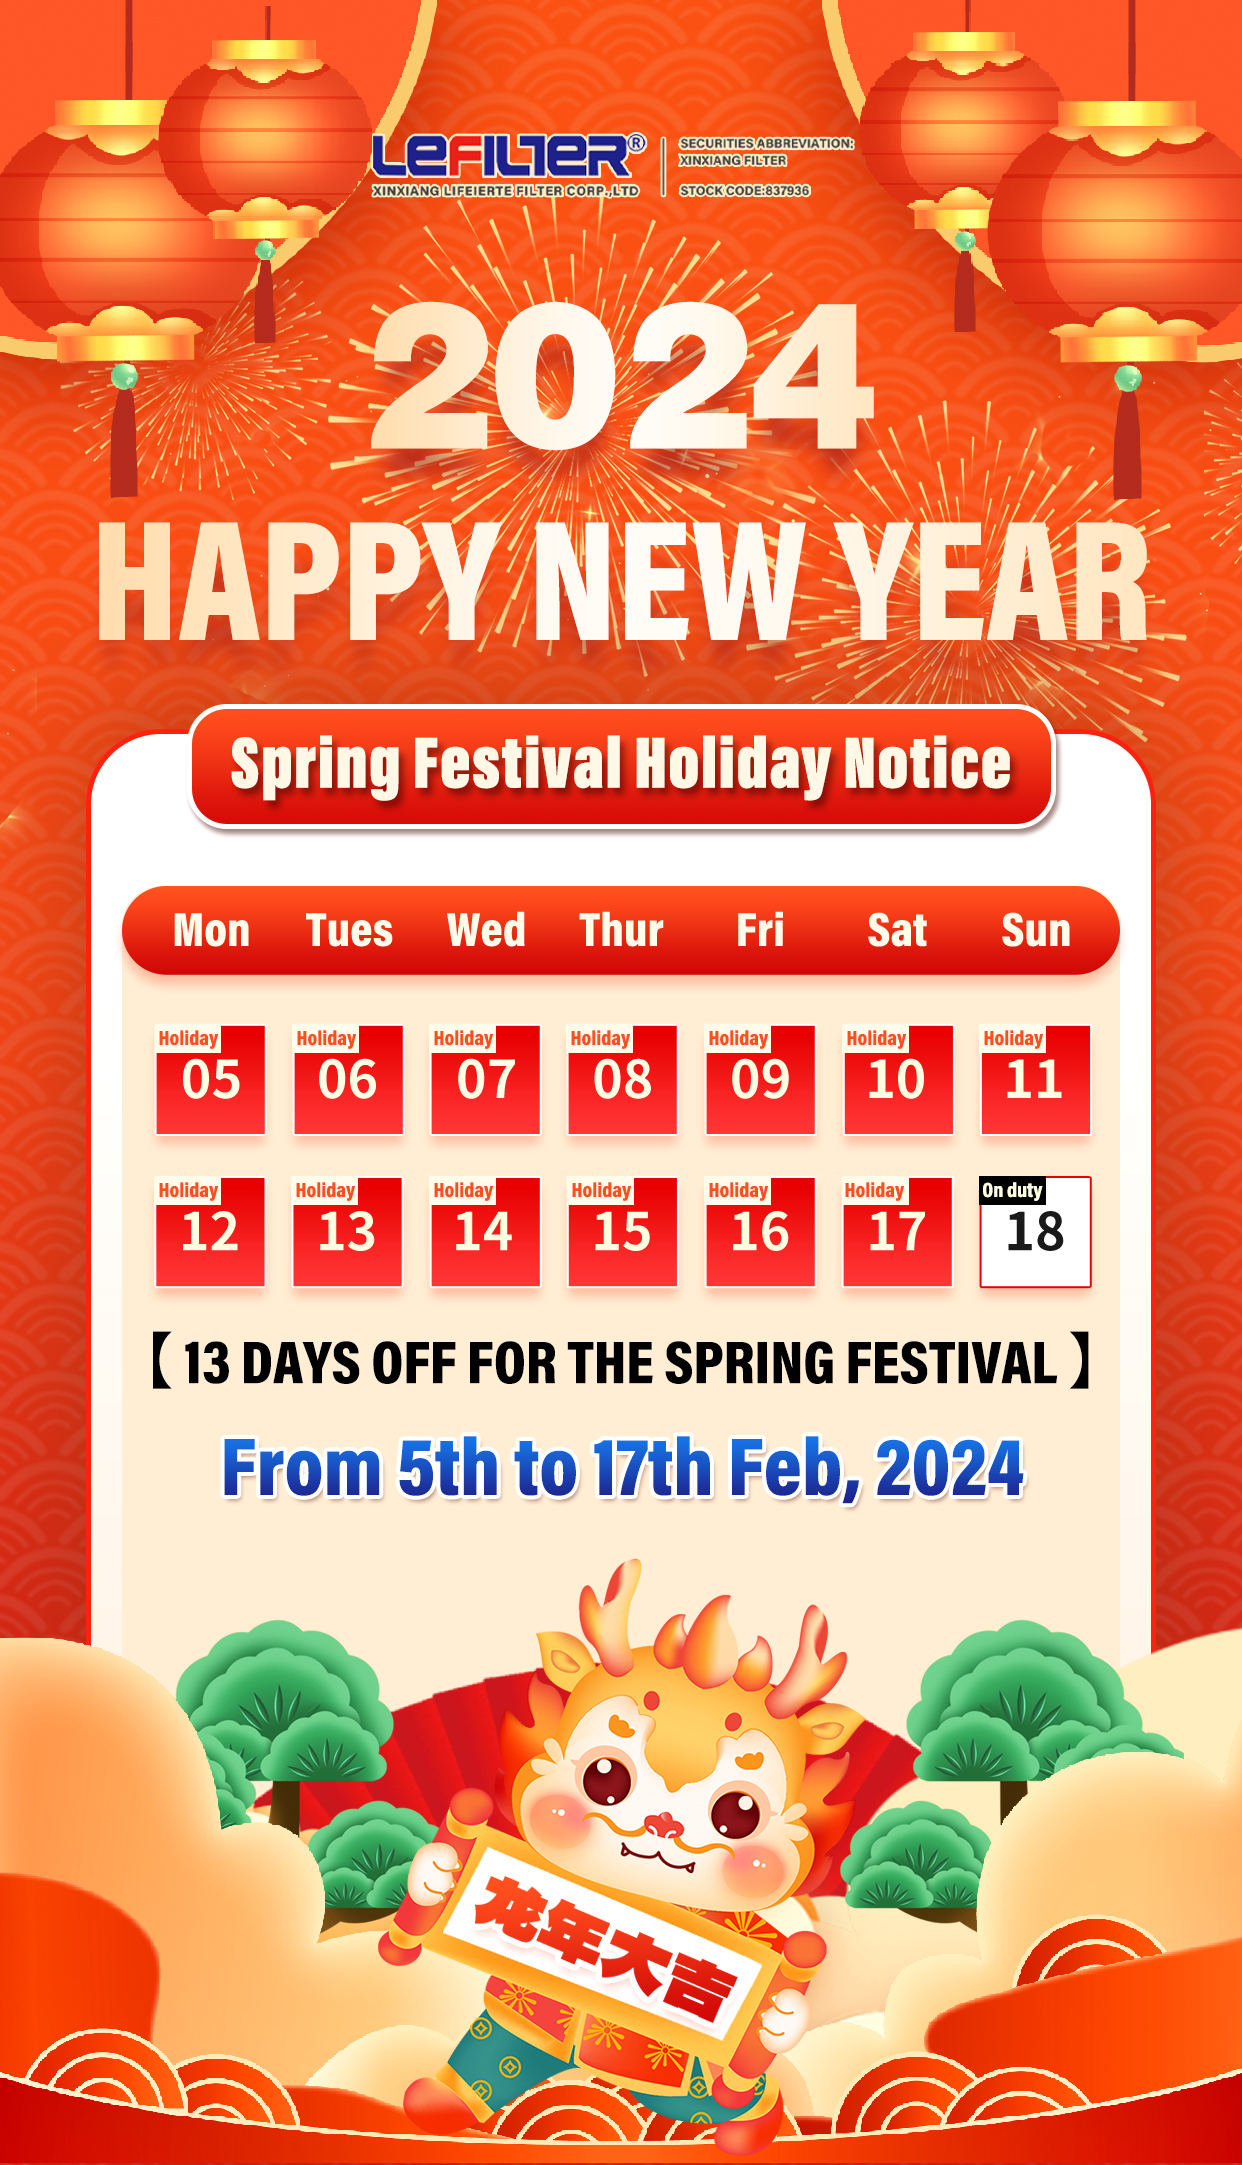 Chinese New Year holiday notice